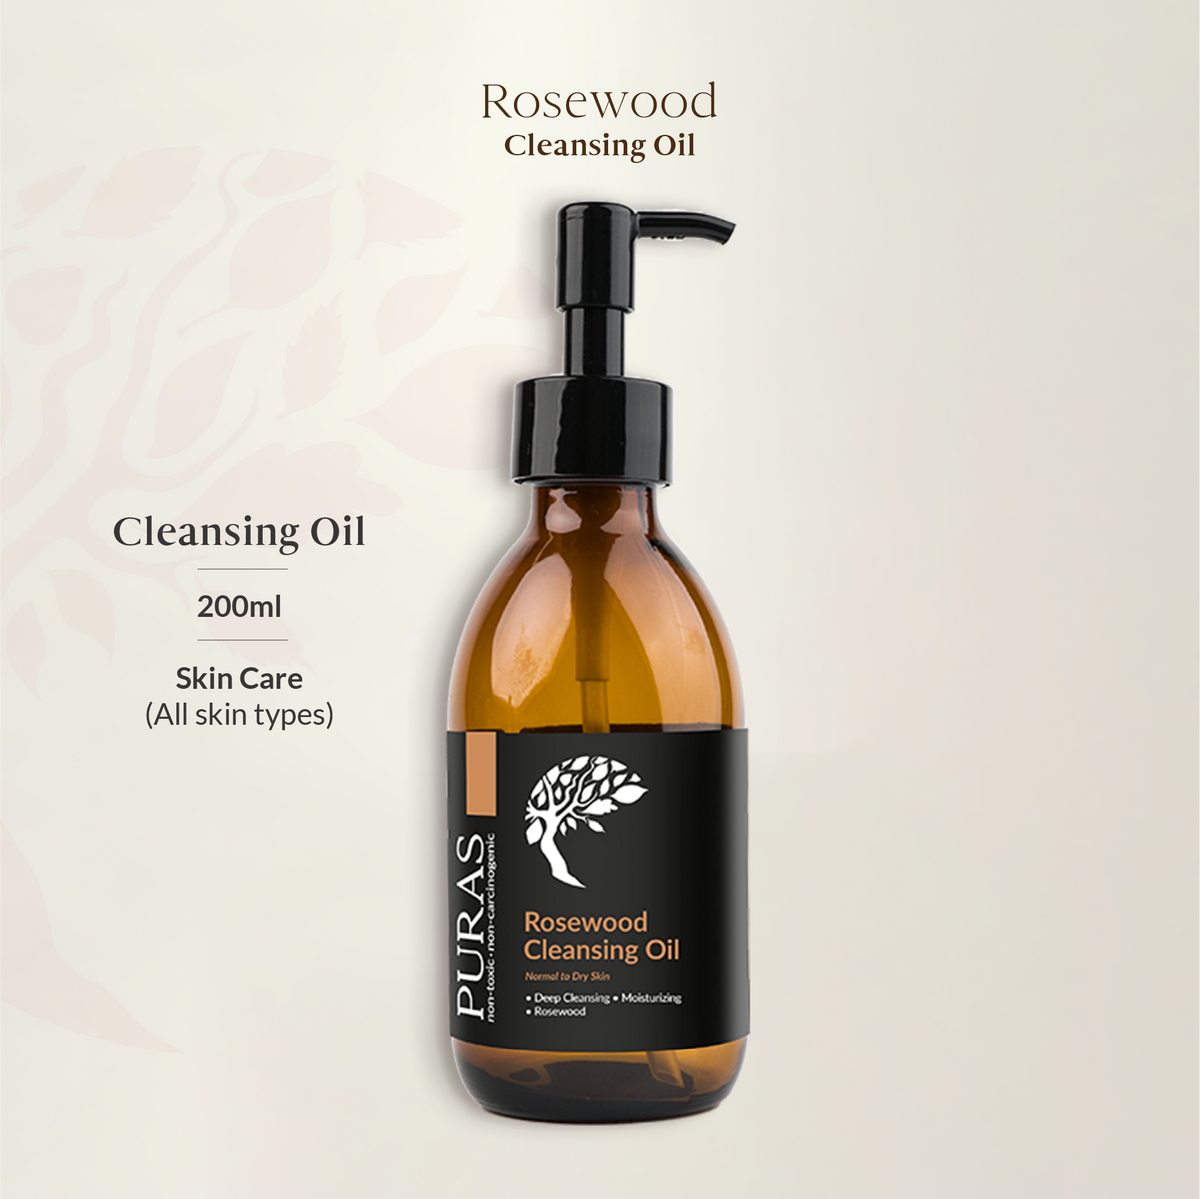 Rosewood Cleansing Oil 200ml